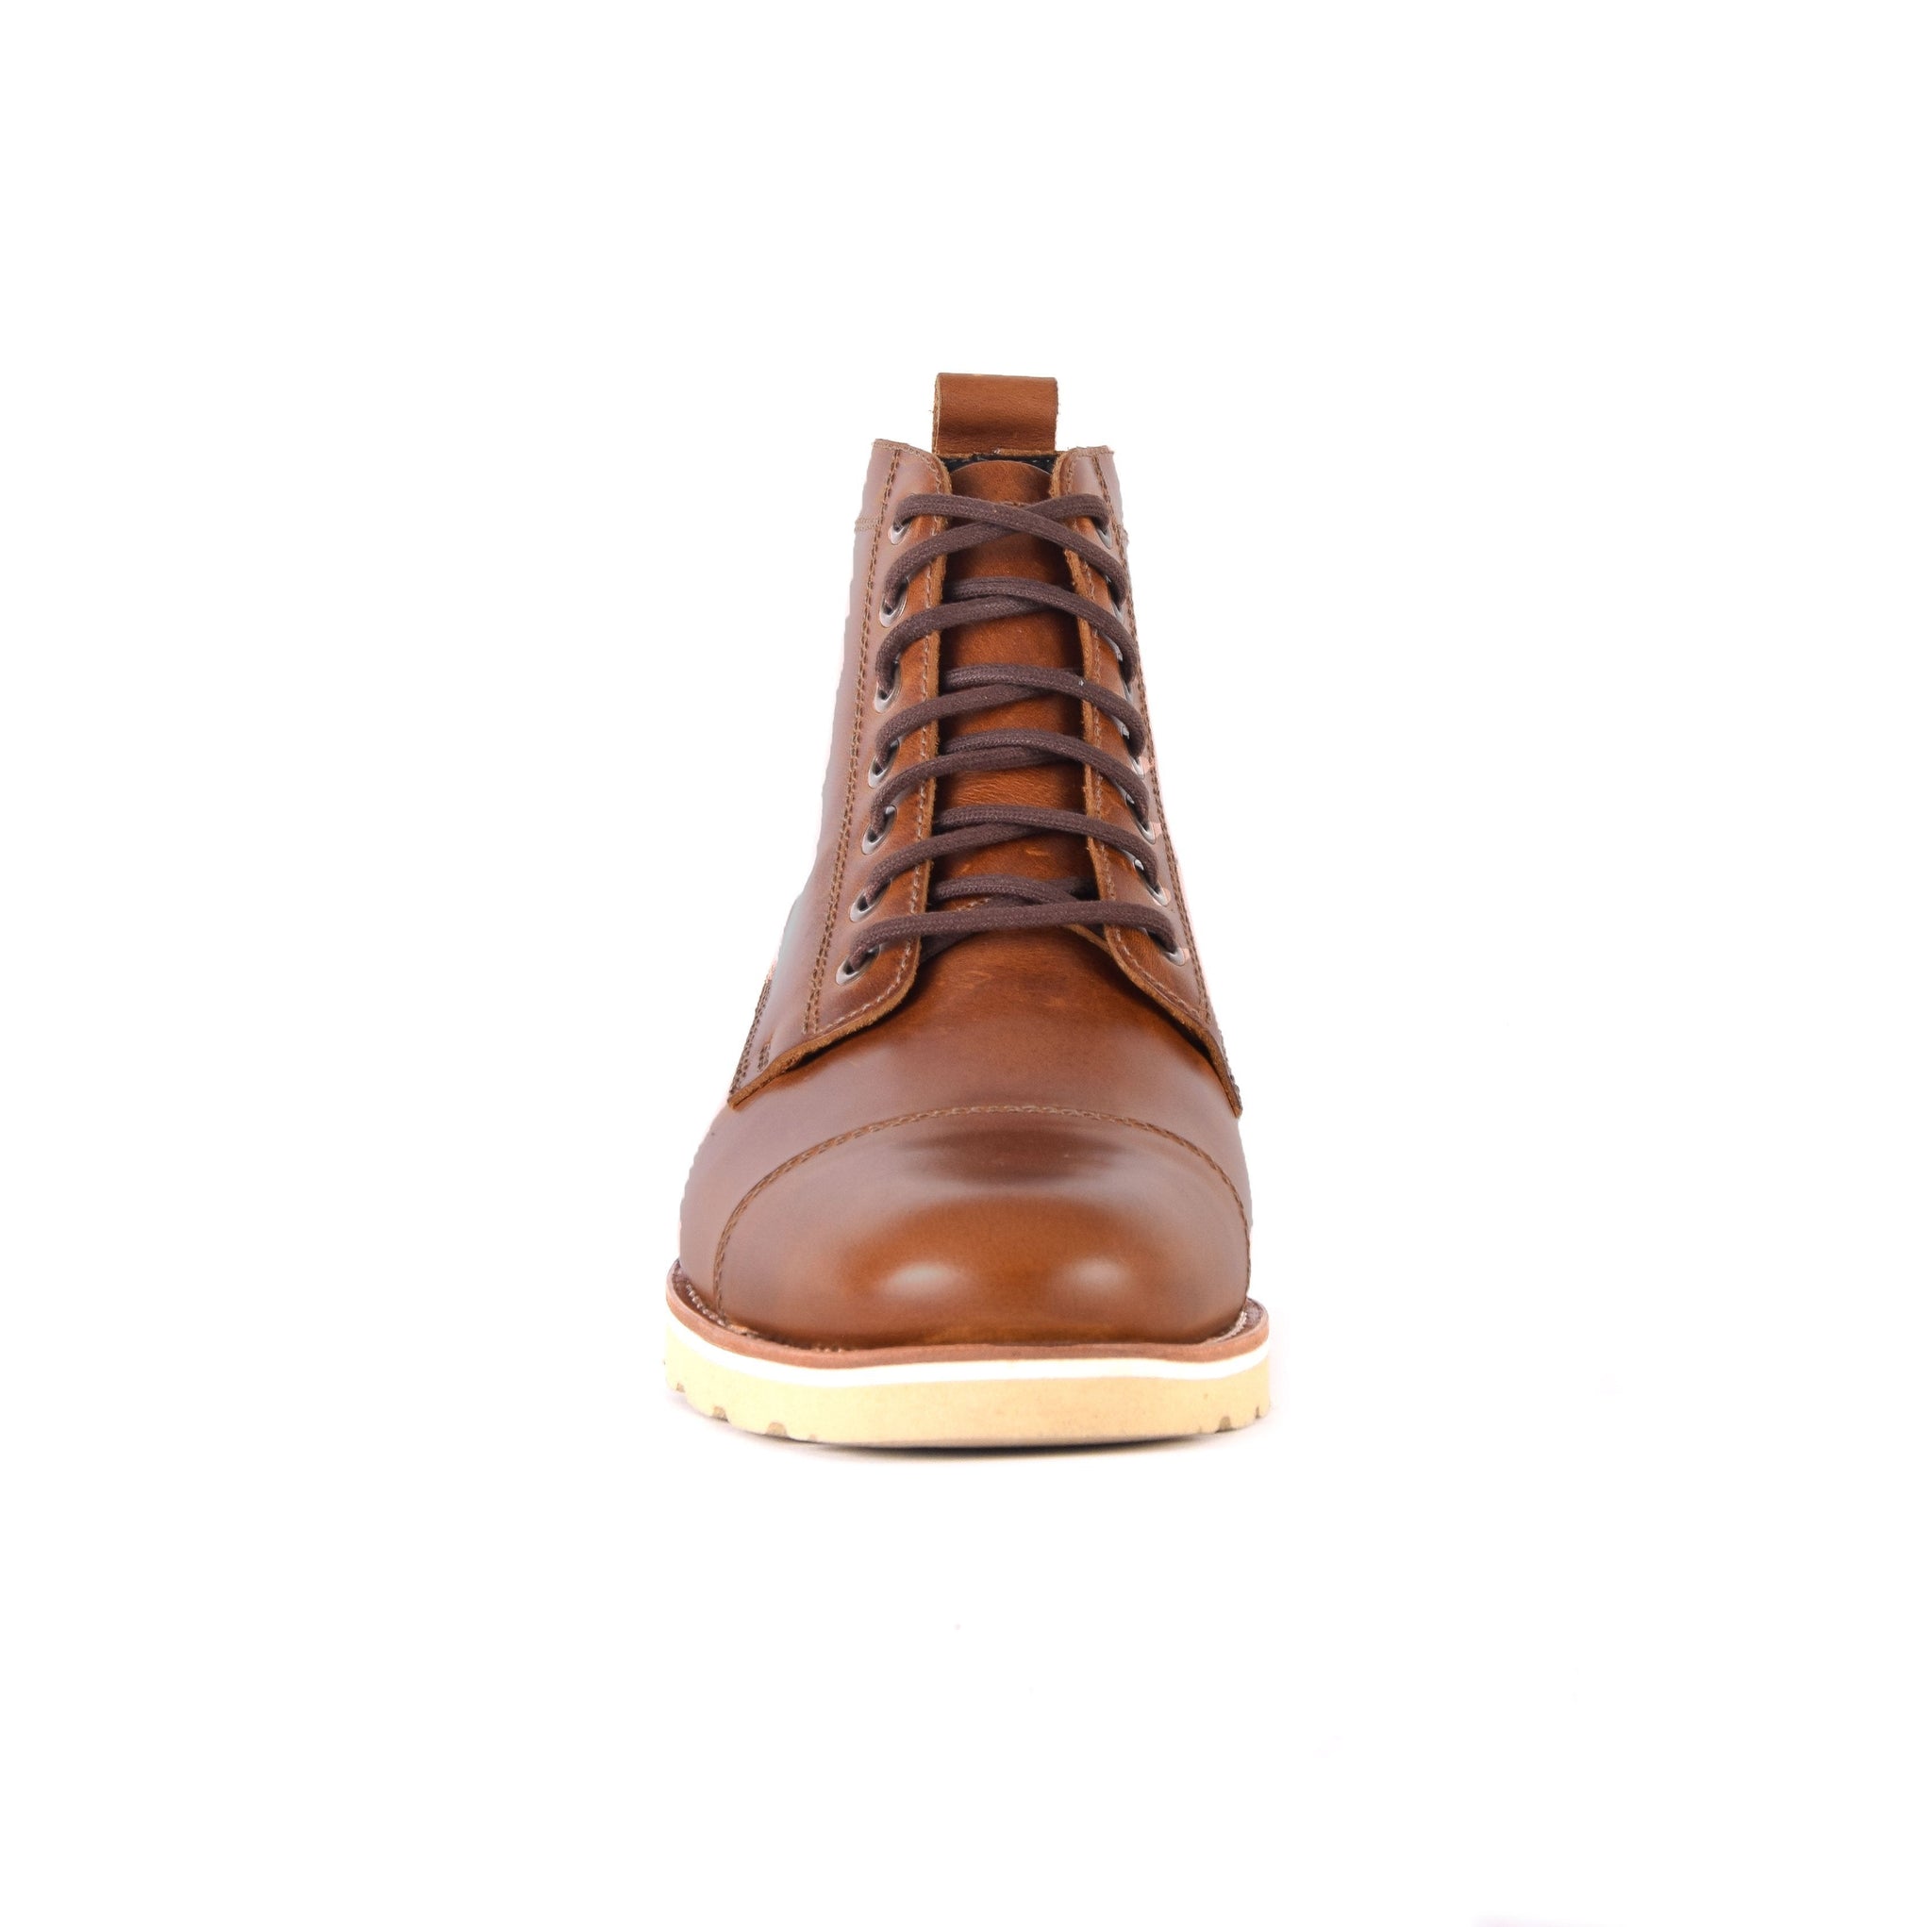 The Lou Teak by HELM Boots